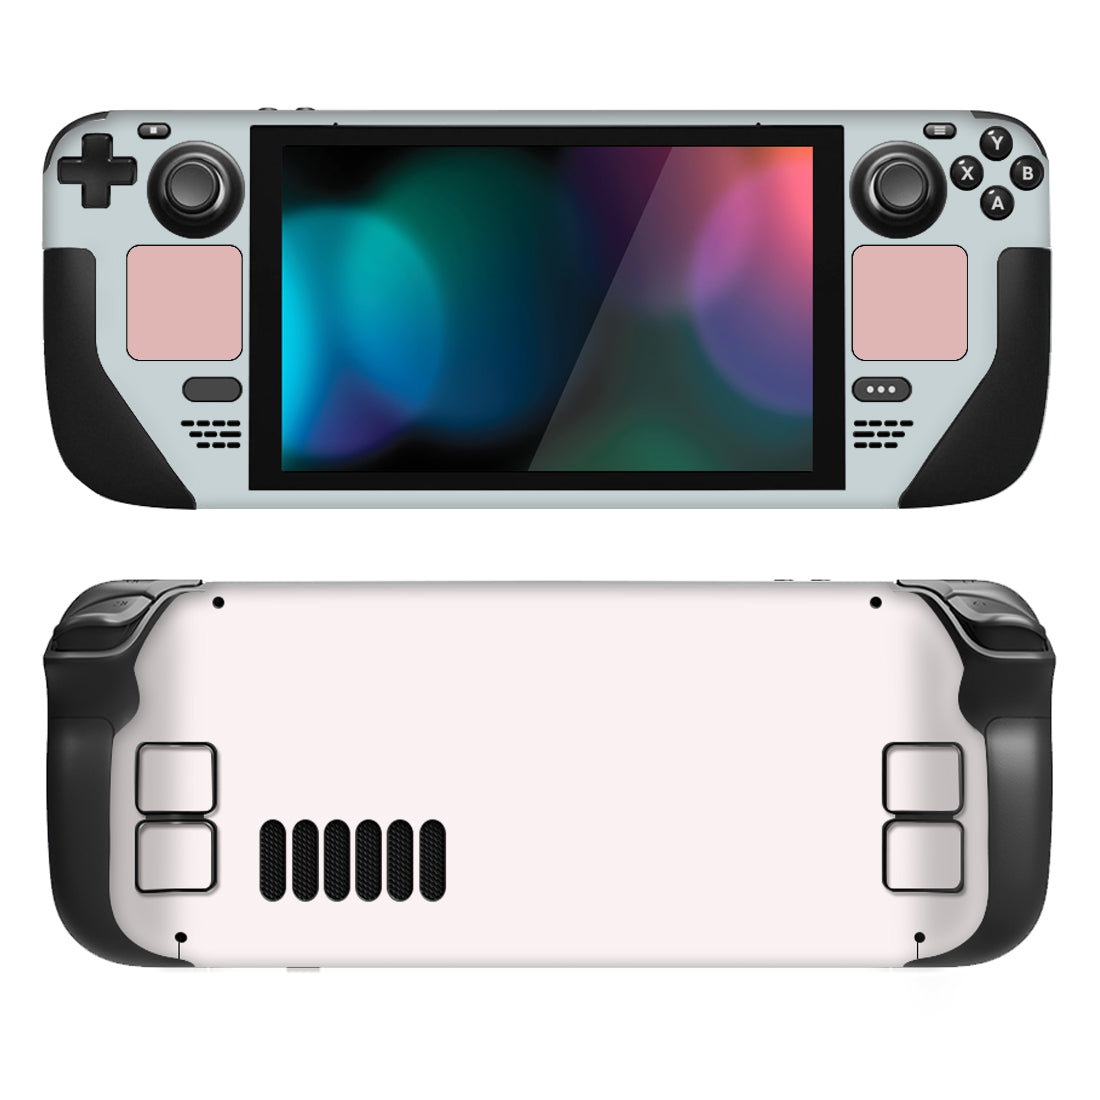 PlayVital Full Set Protective Skin Decal for Steam Deck, Custom Stickers Vinyl Cover for Steam Deck Handheld Gaming PC - Pale Series - Mist Grey & Pink #2 - SDTM087 PlayVital